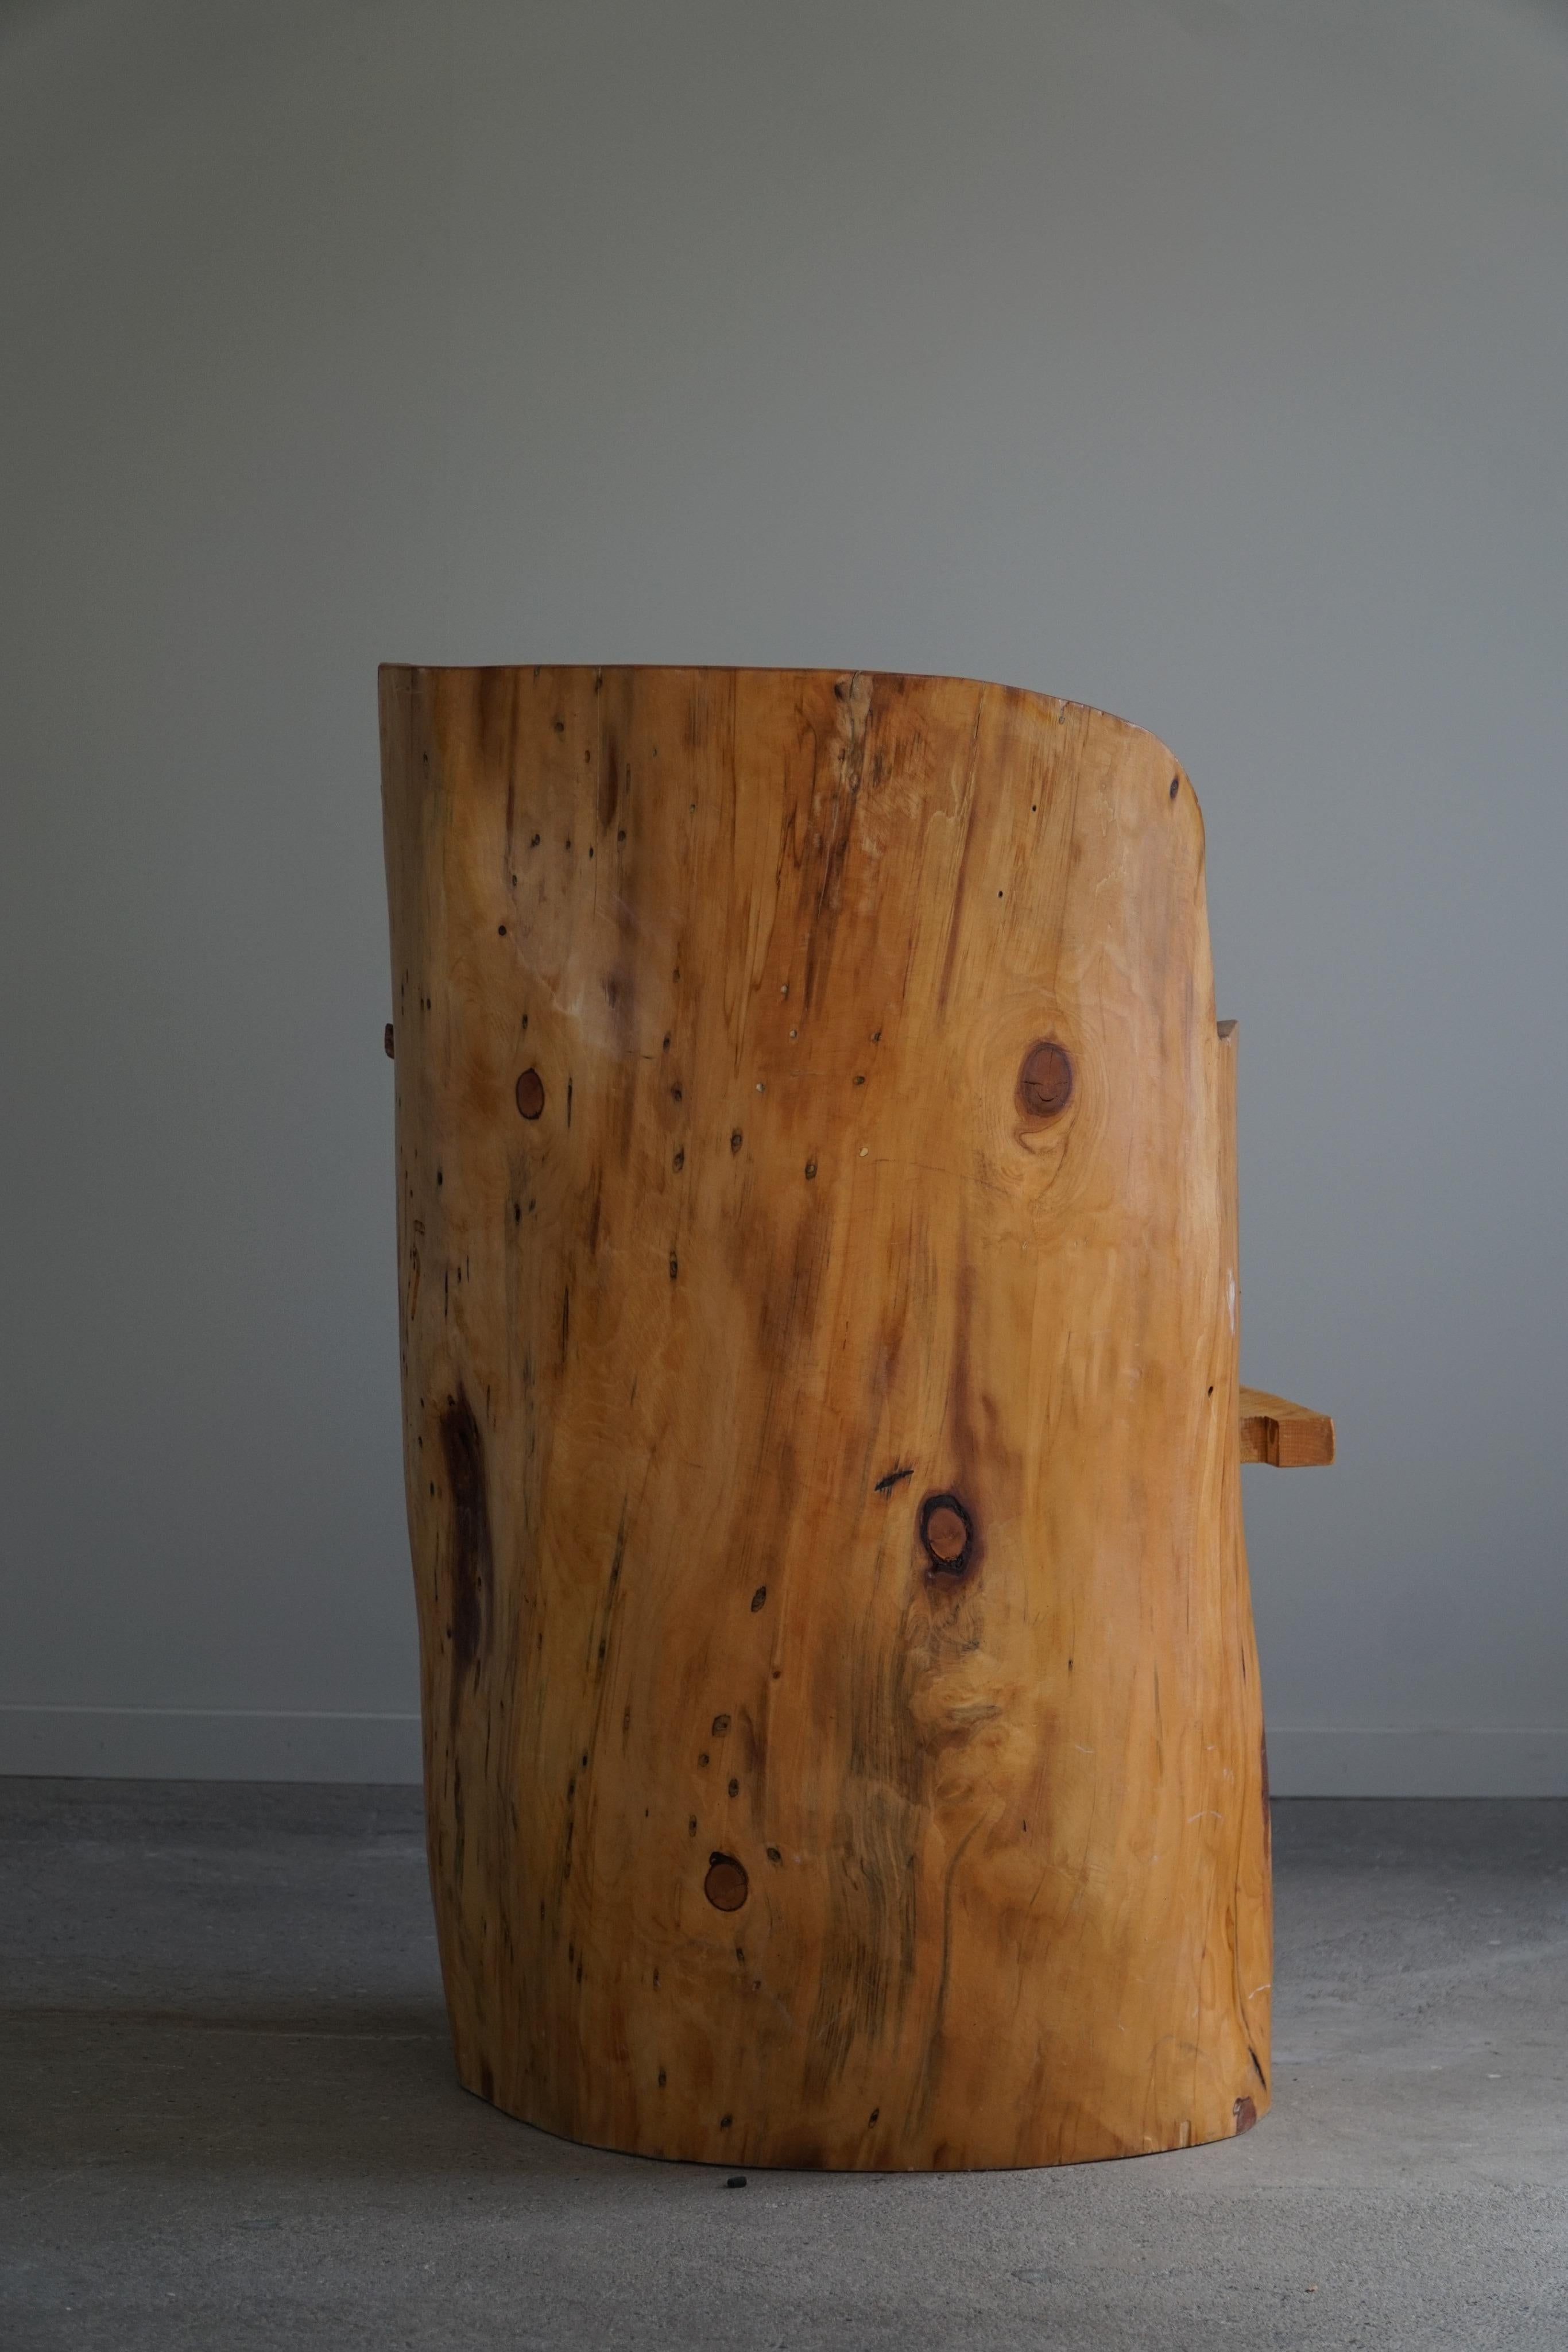 Stump Chair in Solid Birch by a Swedish Cabinetmaker, Wabi Sabi, 1950s For Sale 7